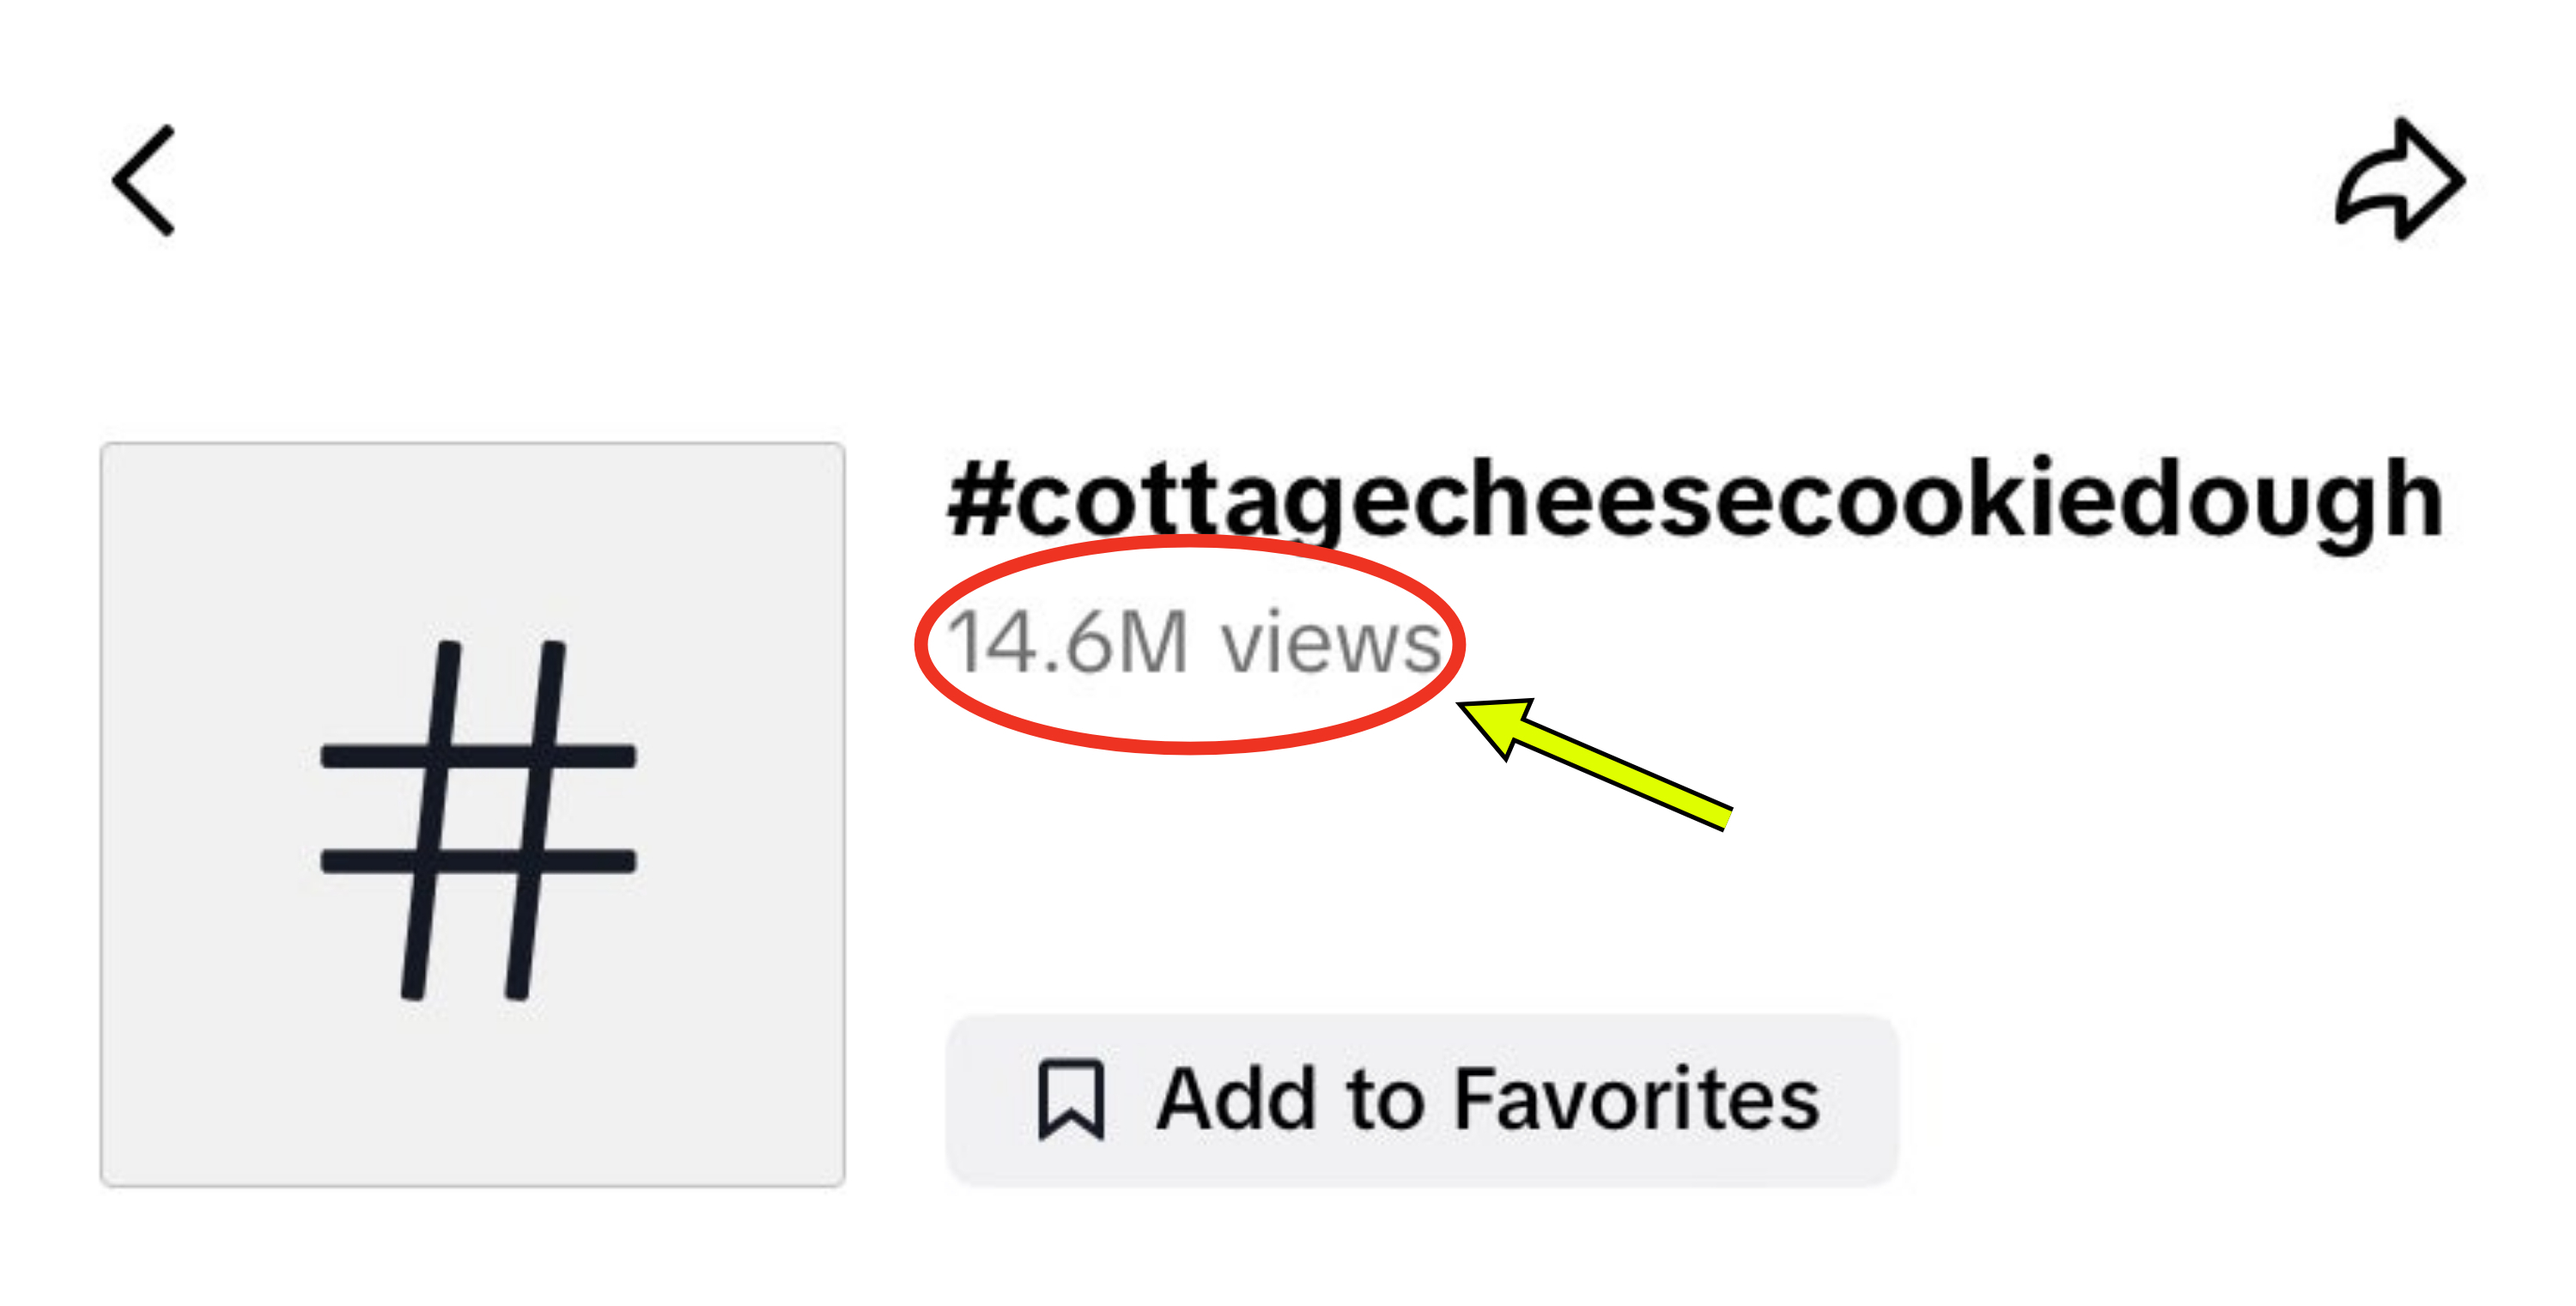 The hashtag &quot;cottage cheese cookie dough&quot; on TikTok with 14.6 million views